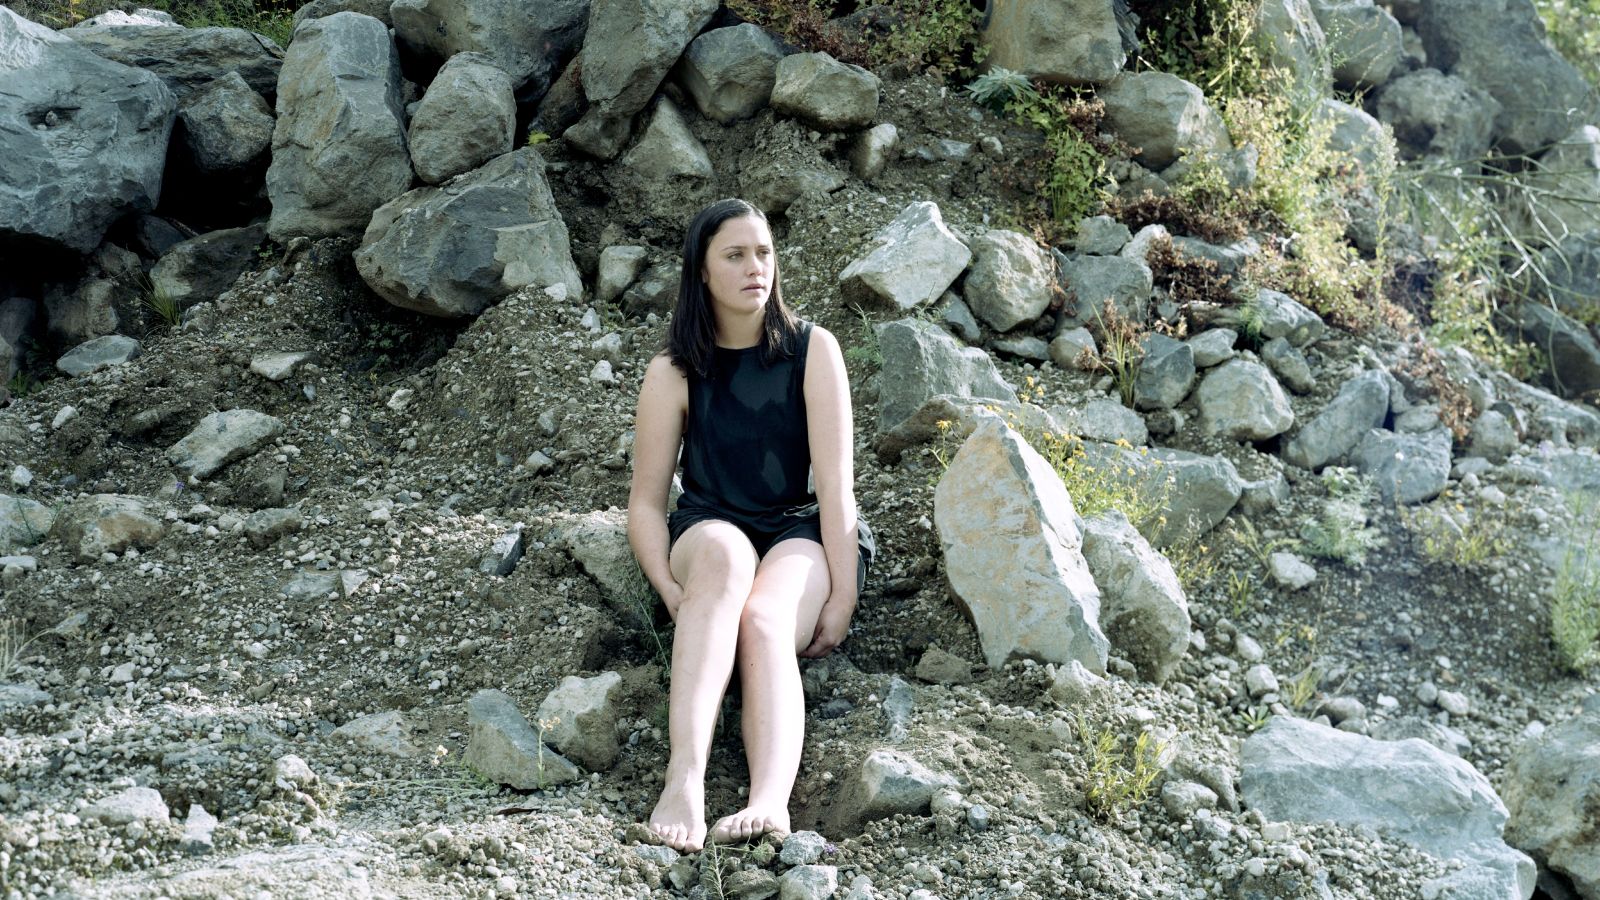 A woman sits on a rocky shore